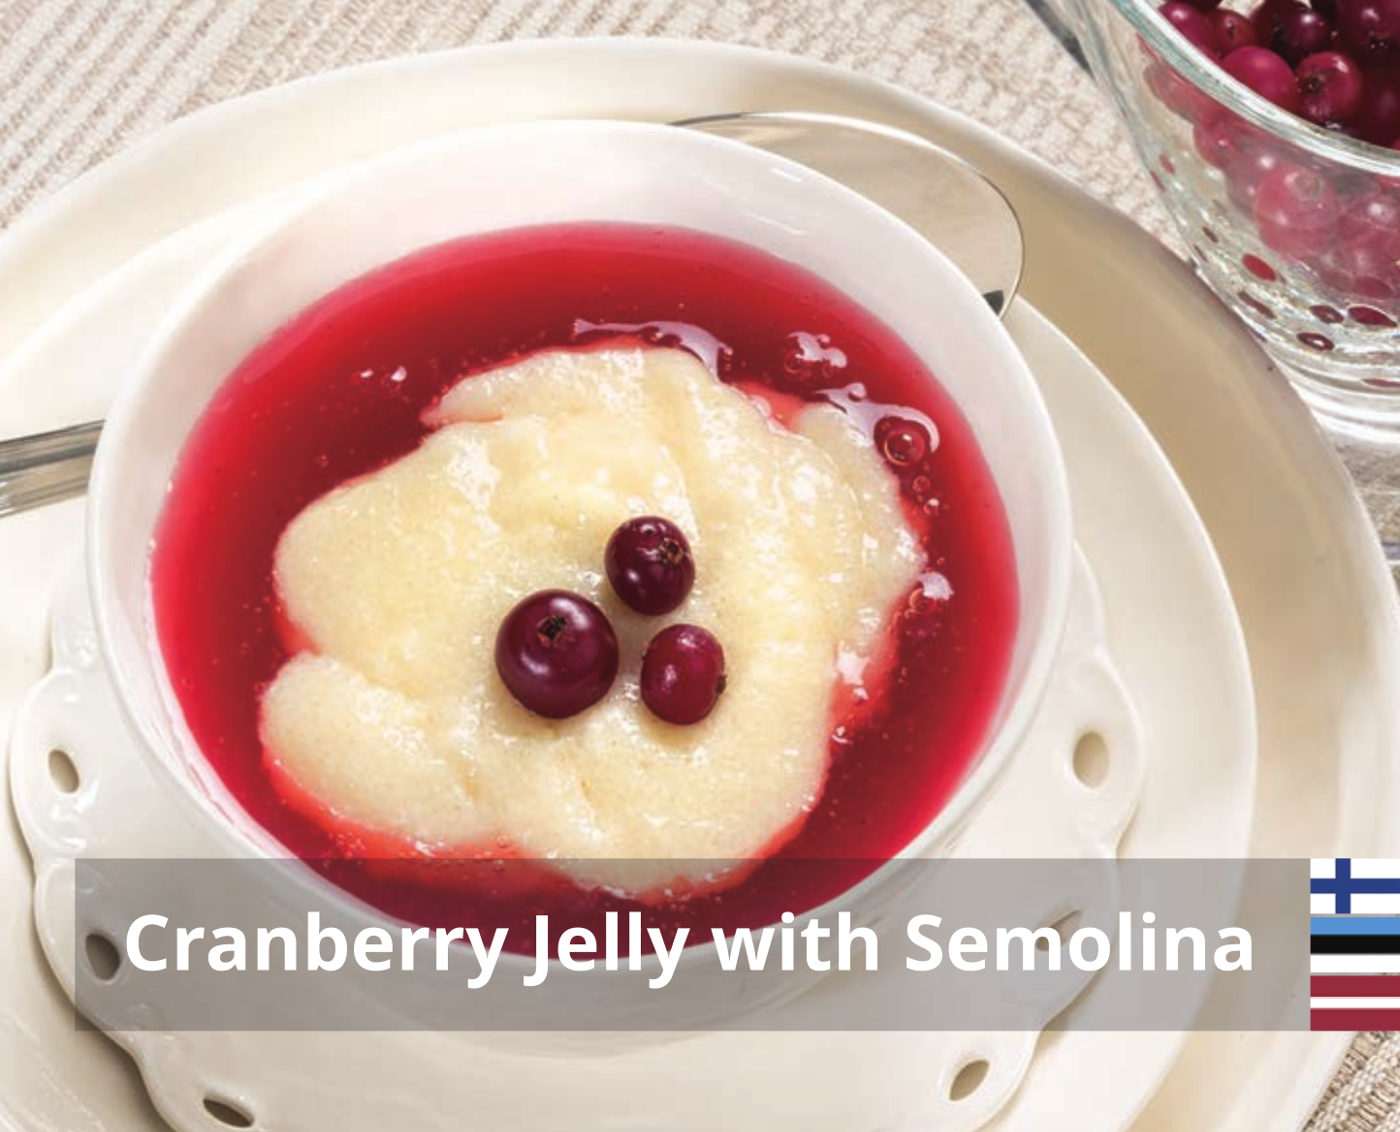 Cranberry Jelly with Semolina